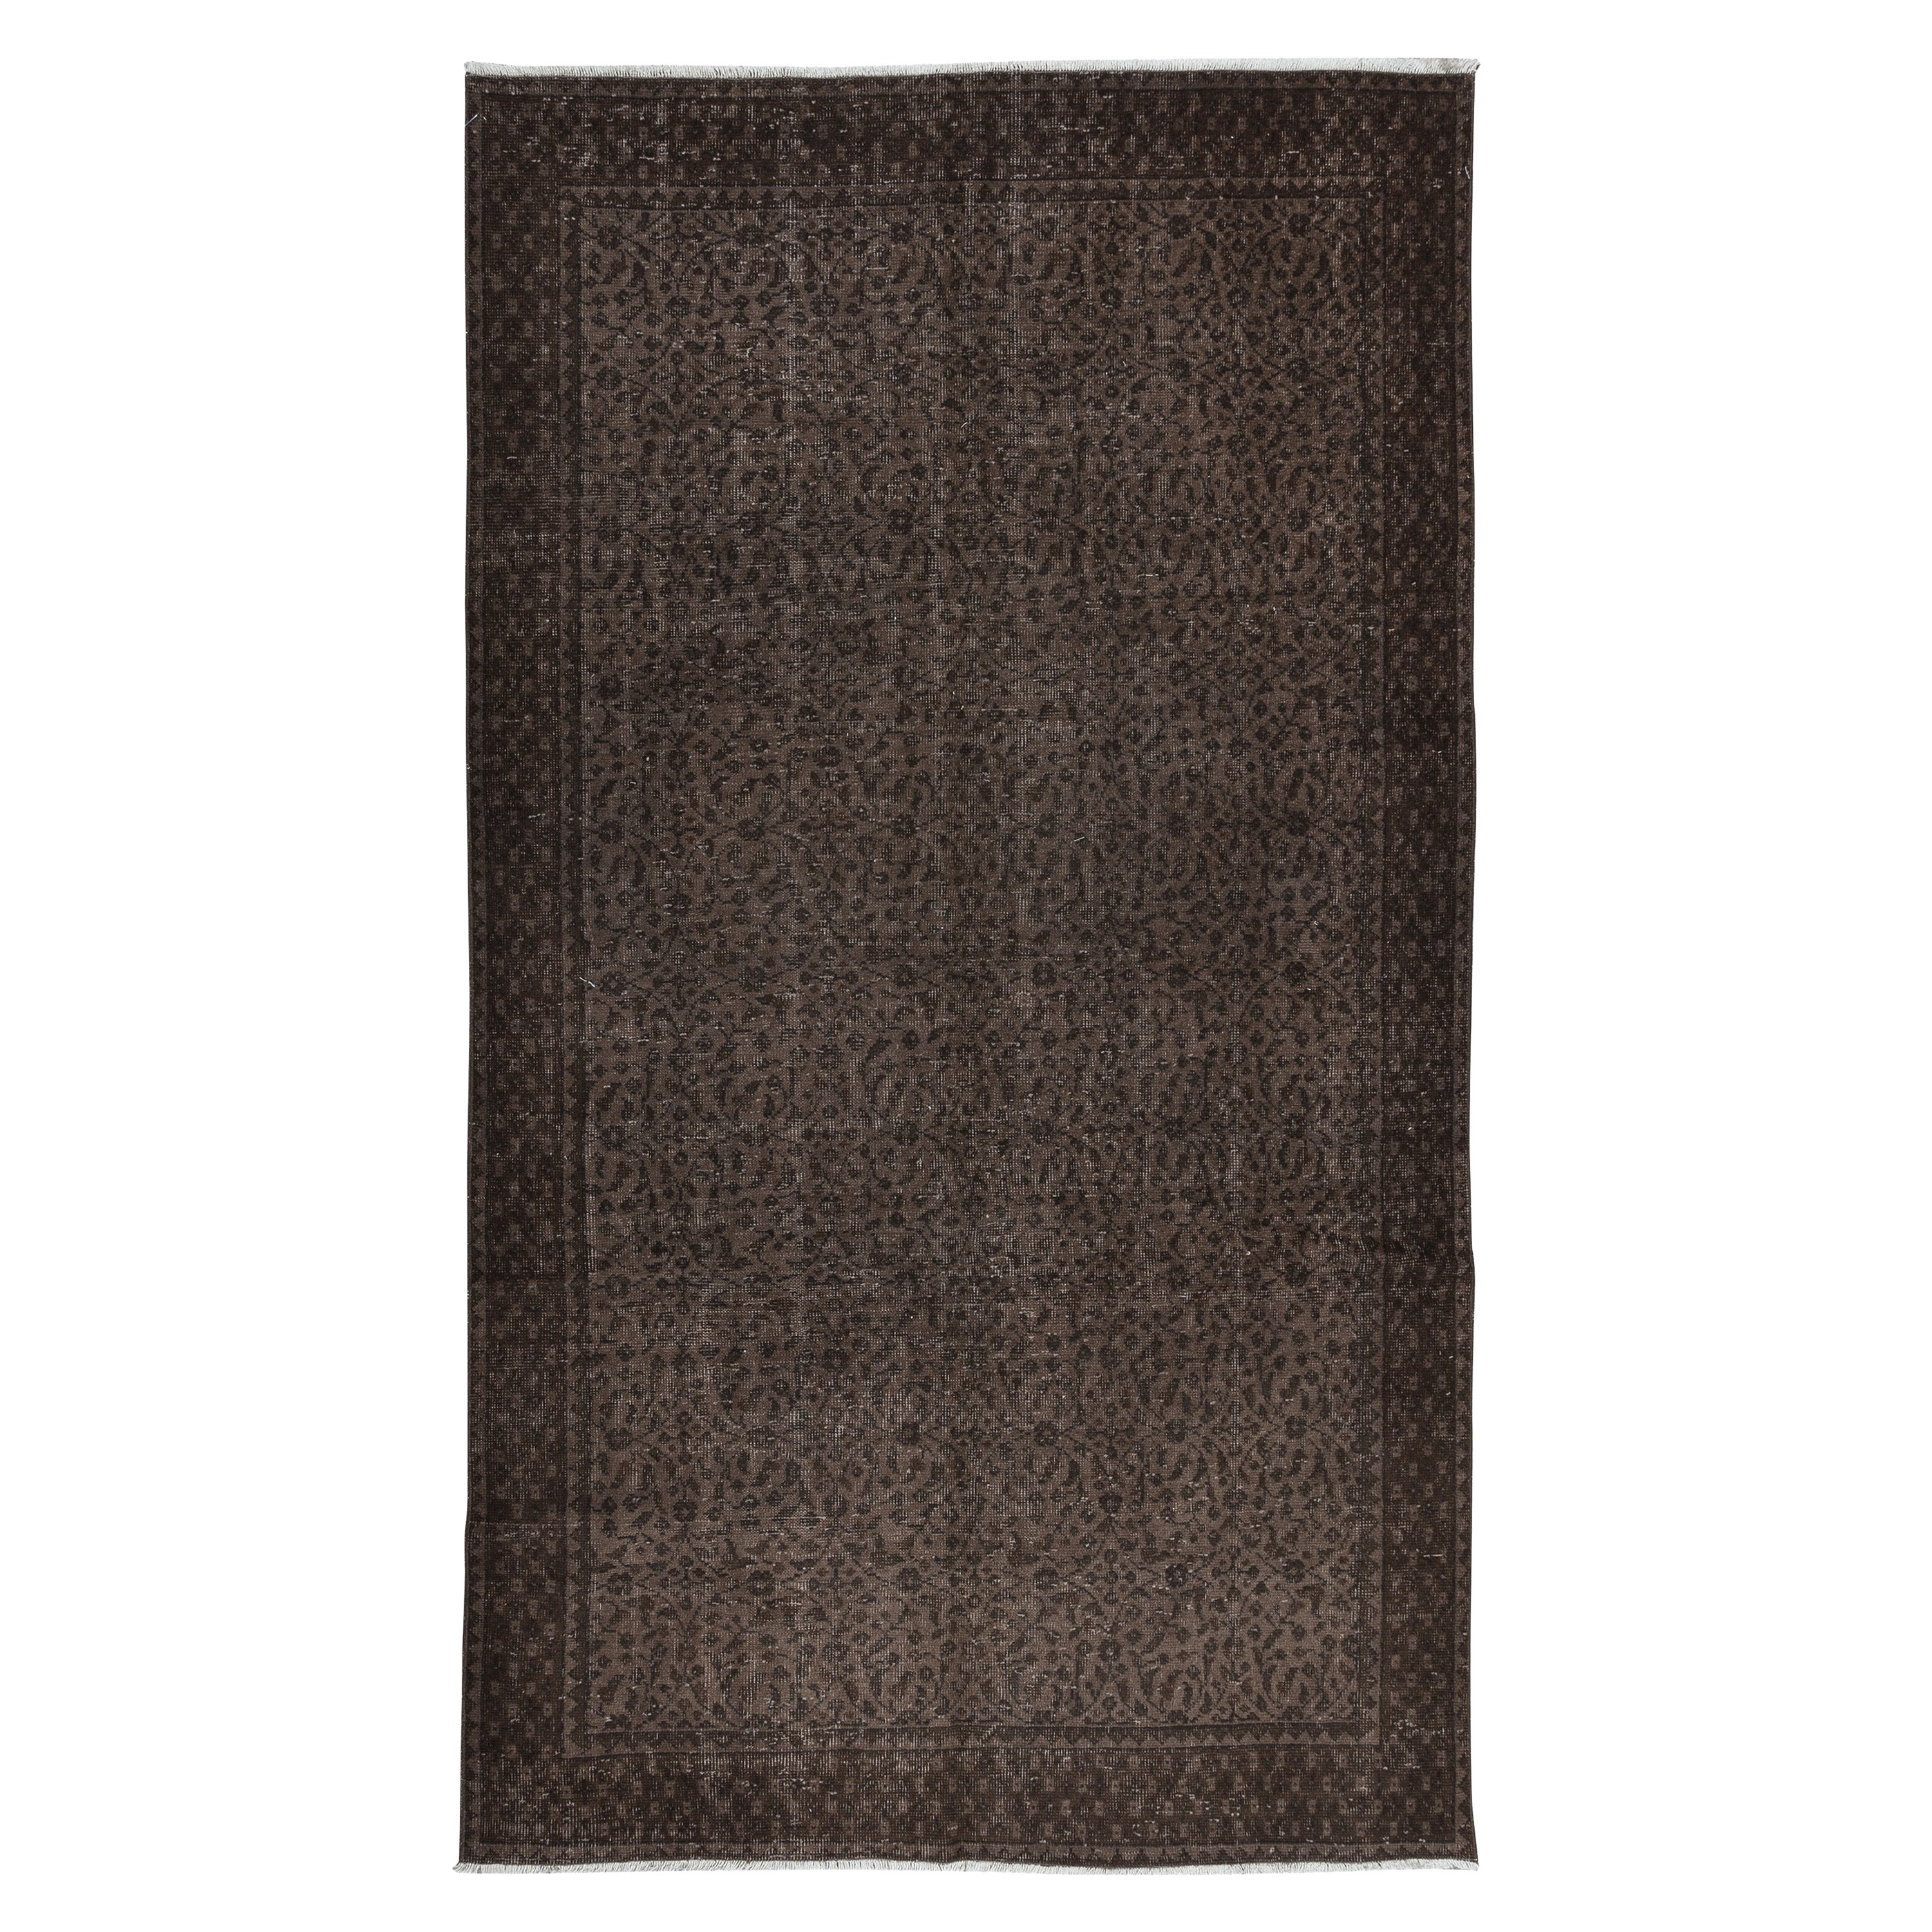 5.4x9 Ft Handmade Brown Floral Area Rug from Turkey, Modern Turkish Wool Carpet For Sale